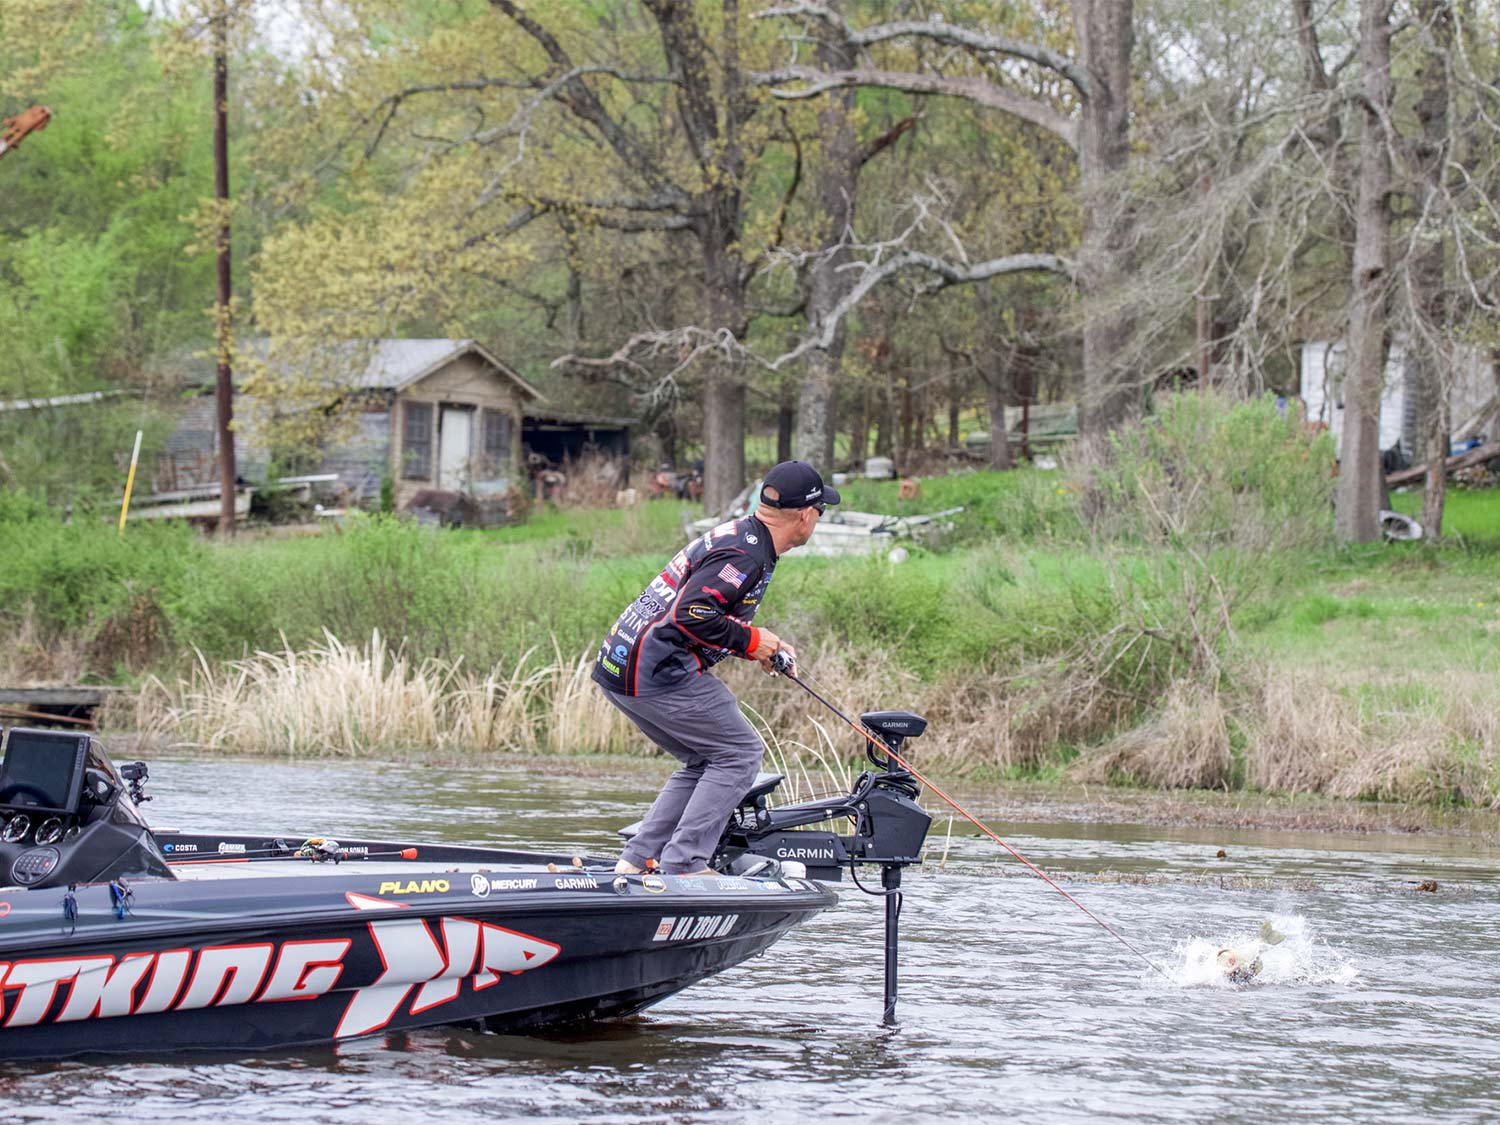 Angler Brent Chapman fishing off the front of a boat.